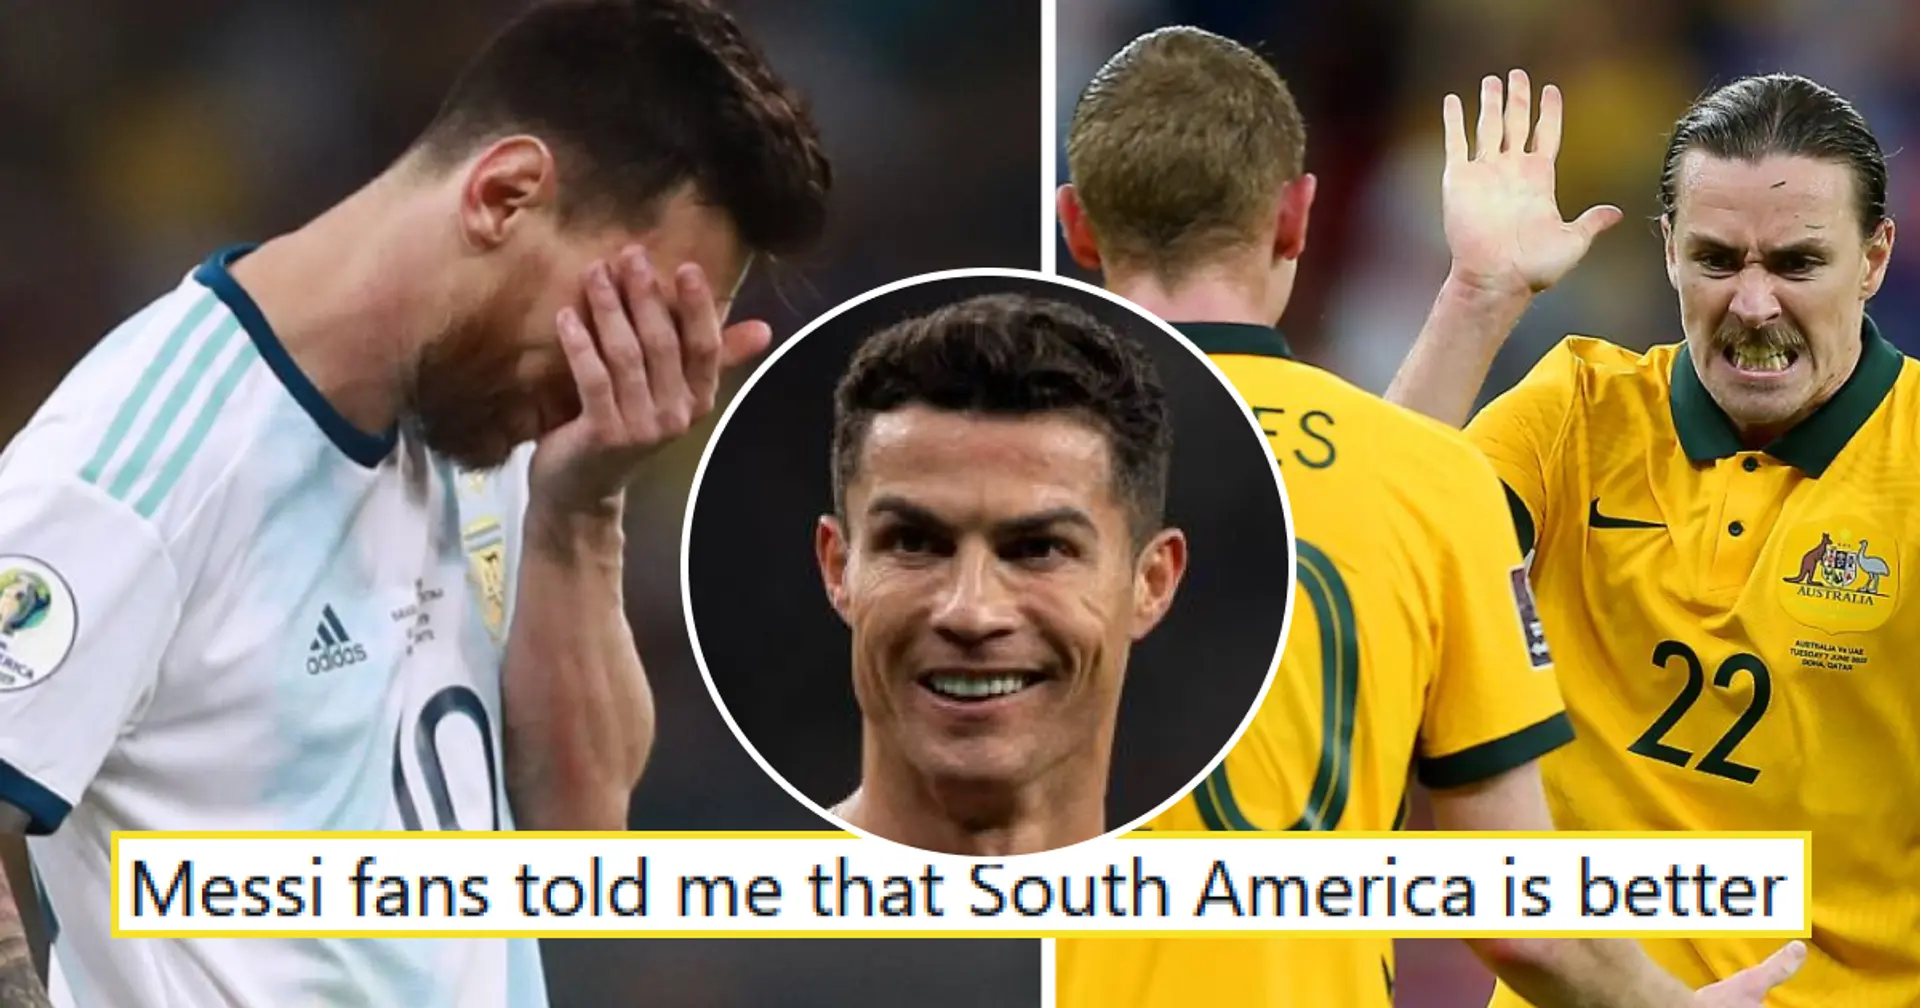 Why is Messi slander trending after Australia wins World Cup spot? Explained